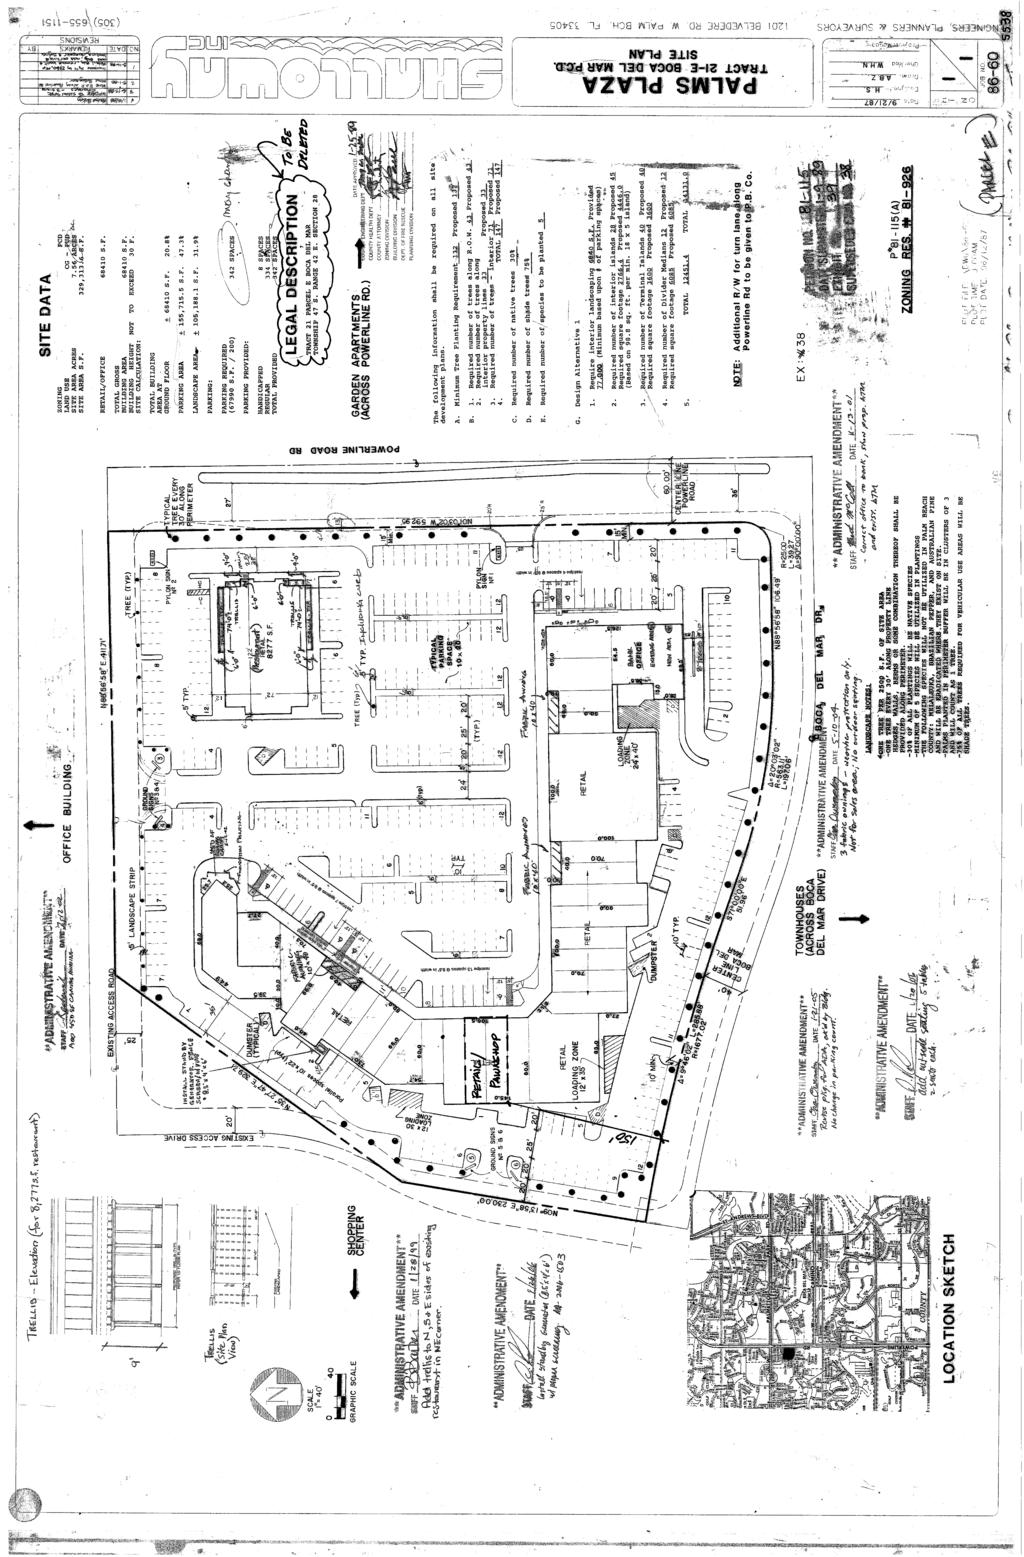 Figure 5 Preliminary Site Plan dated September 14, 2009 Proposed Pawnshop Use is indicated